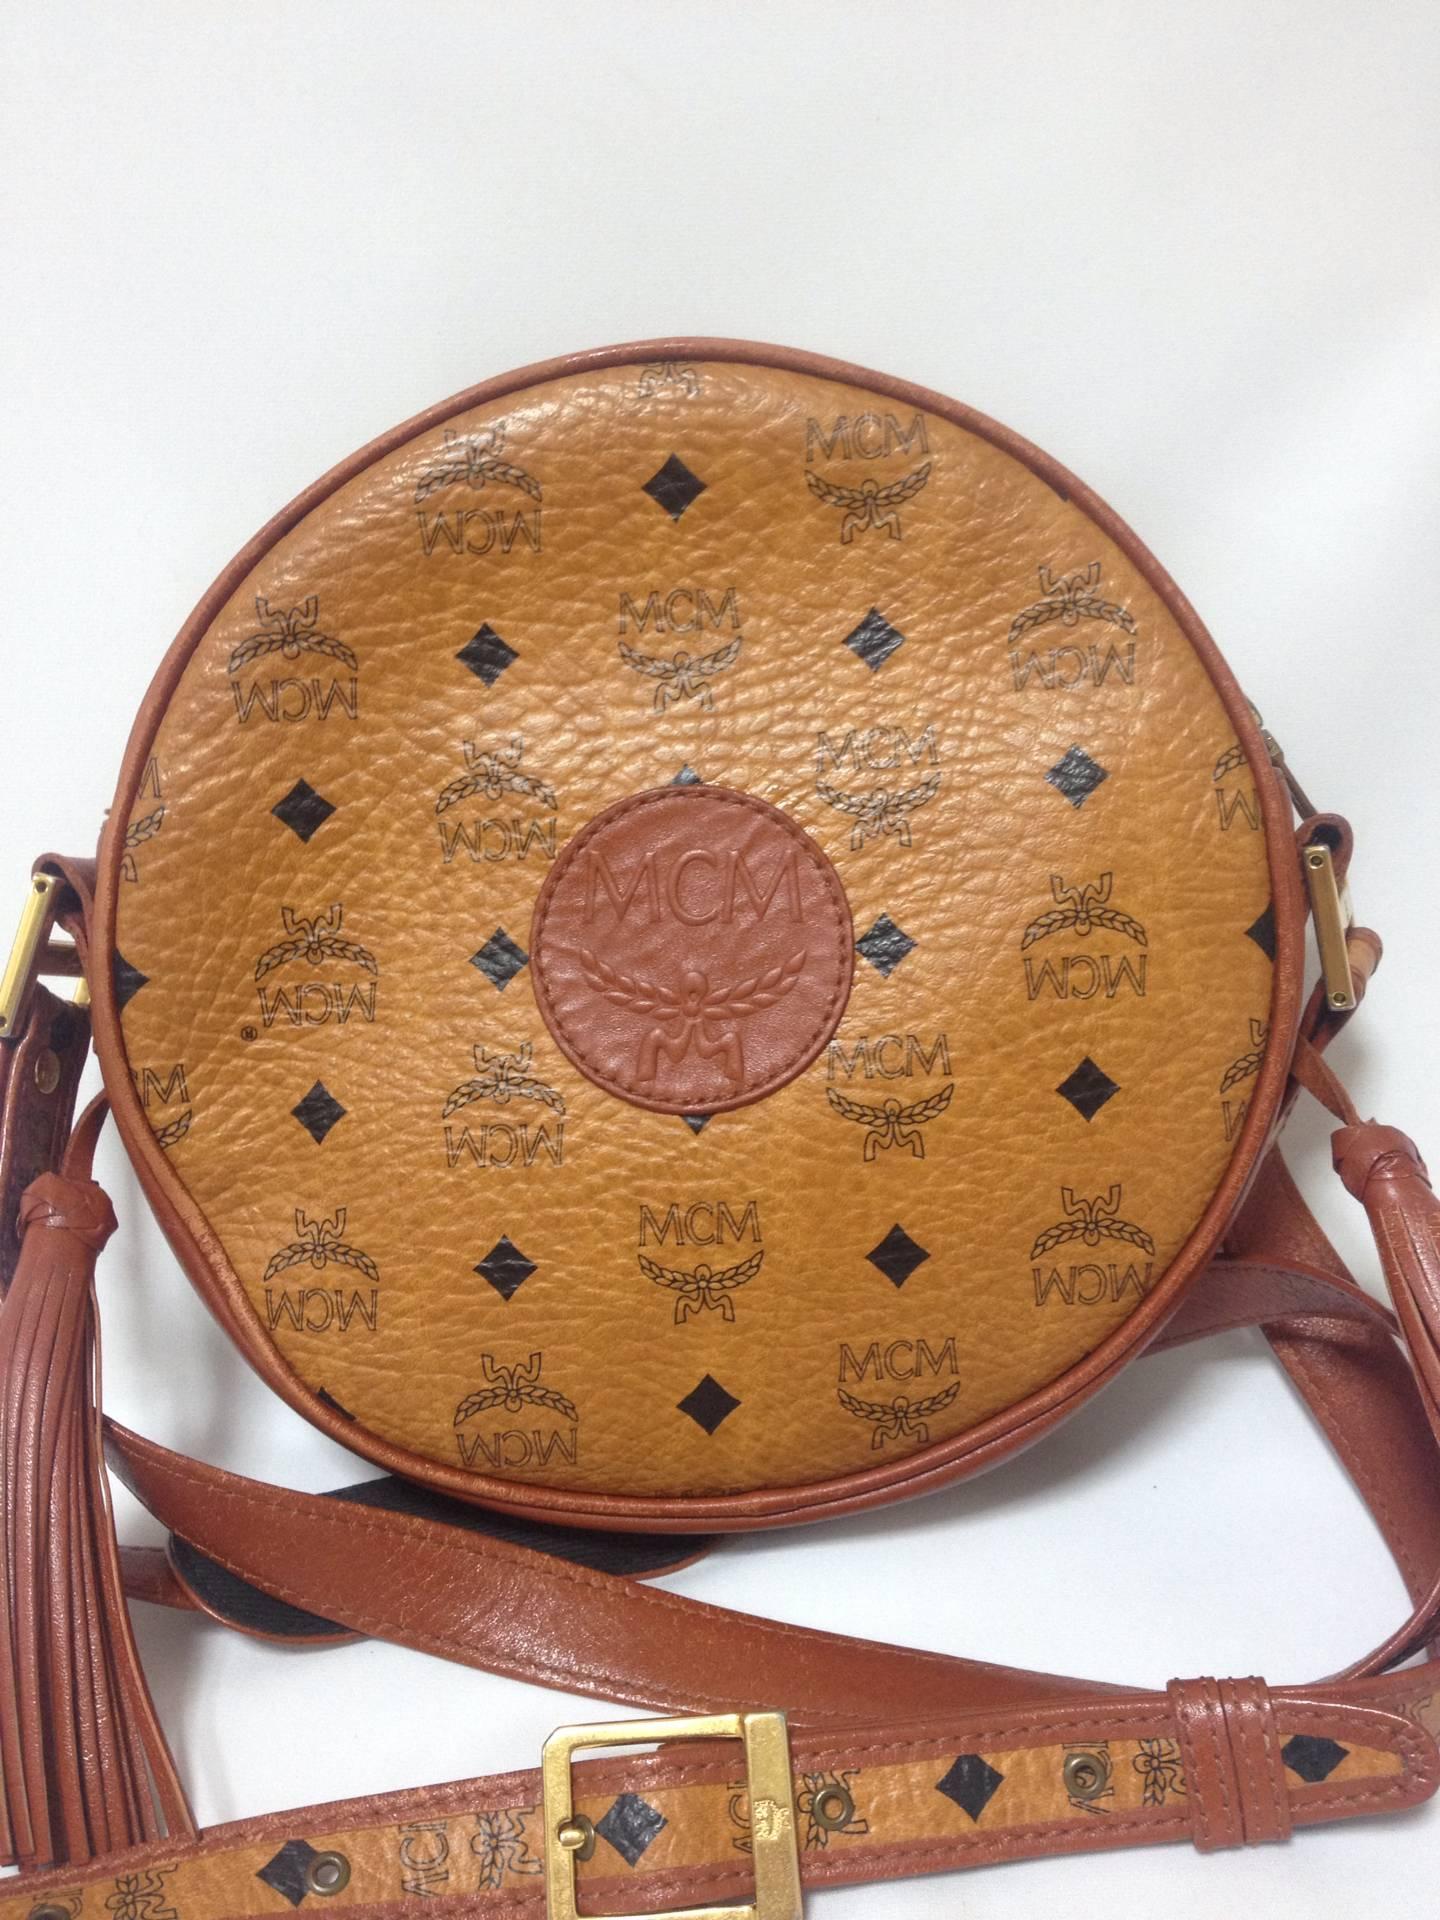 Vintage MCM rare brown monogram round shape shoulder bag with brown leather trimmings. Designed by Michael Cromer. Masterpiece. Unisex use.

MCM has been back in the fashion trend again!!
Now it's considered to be one of the must-have designer in